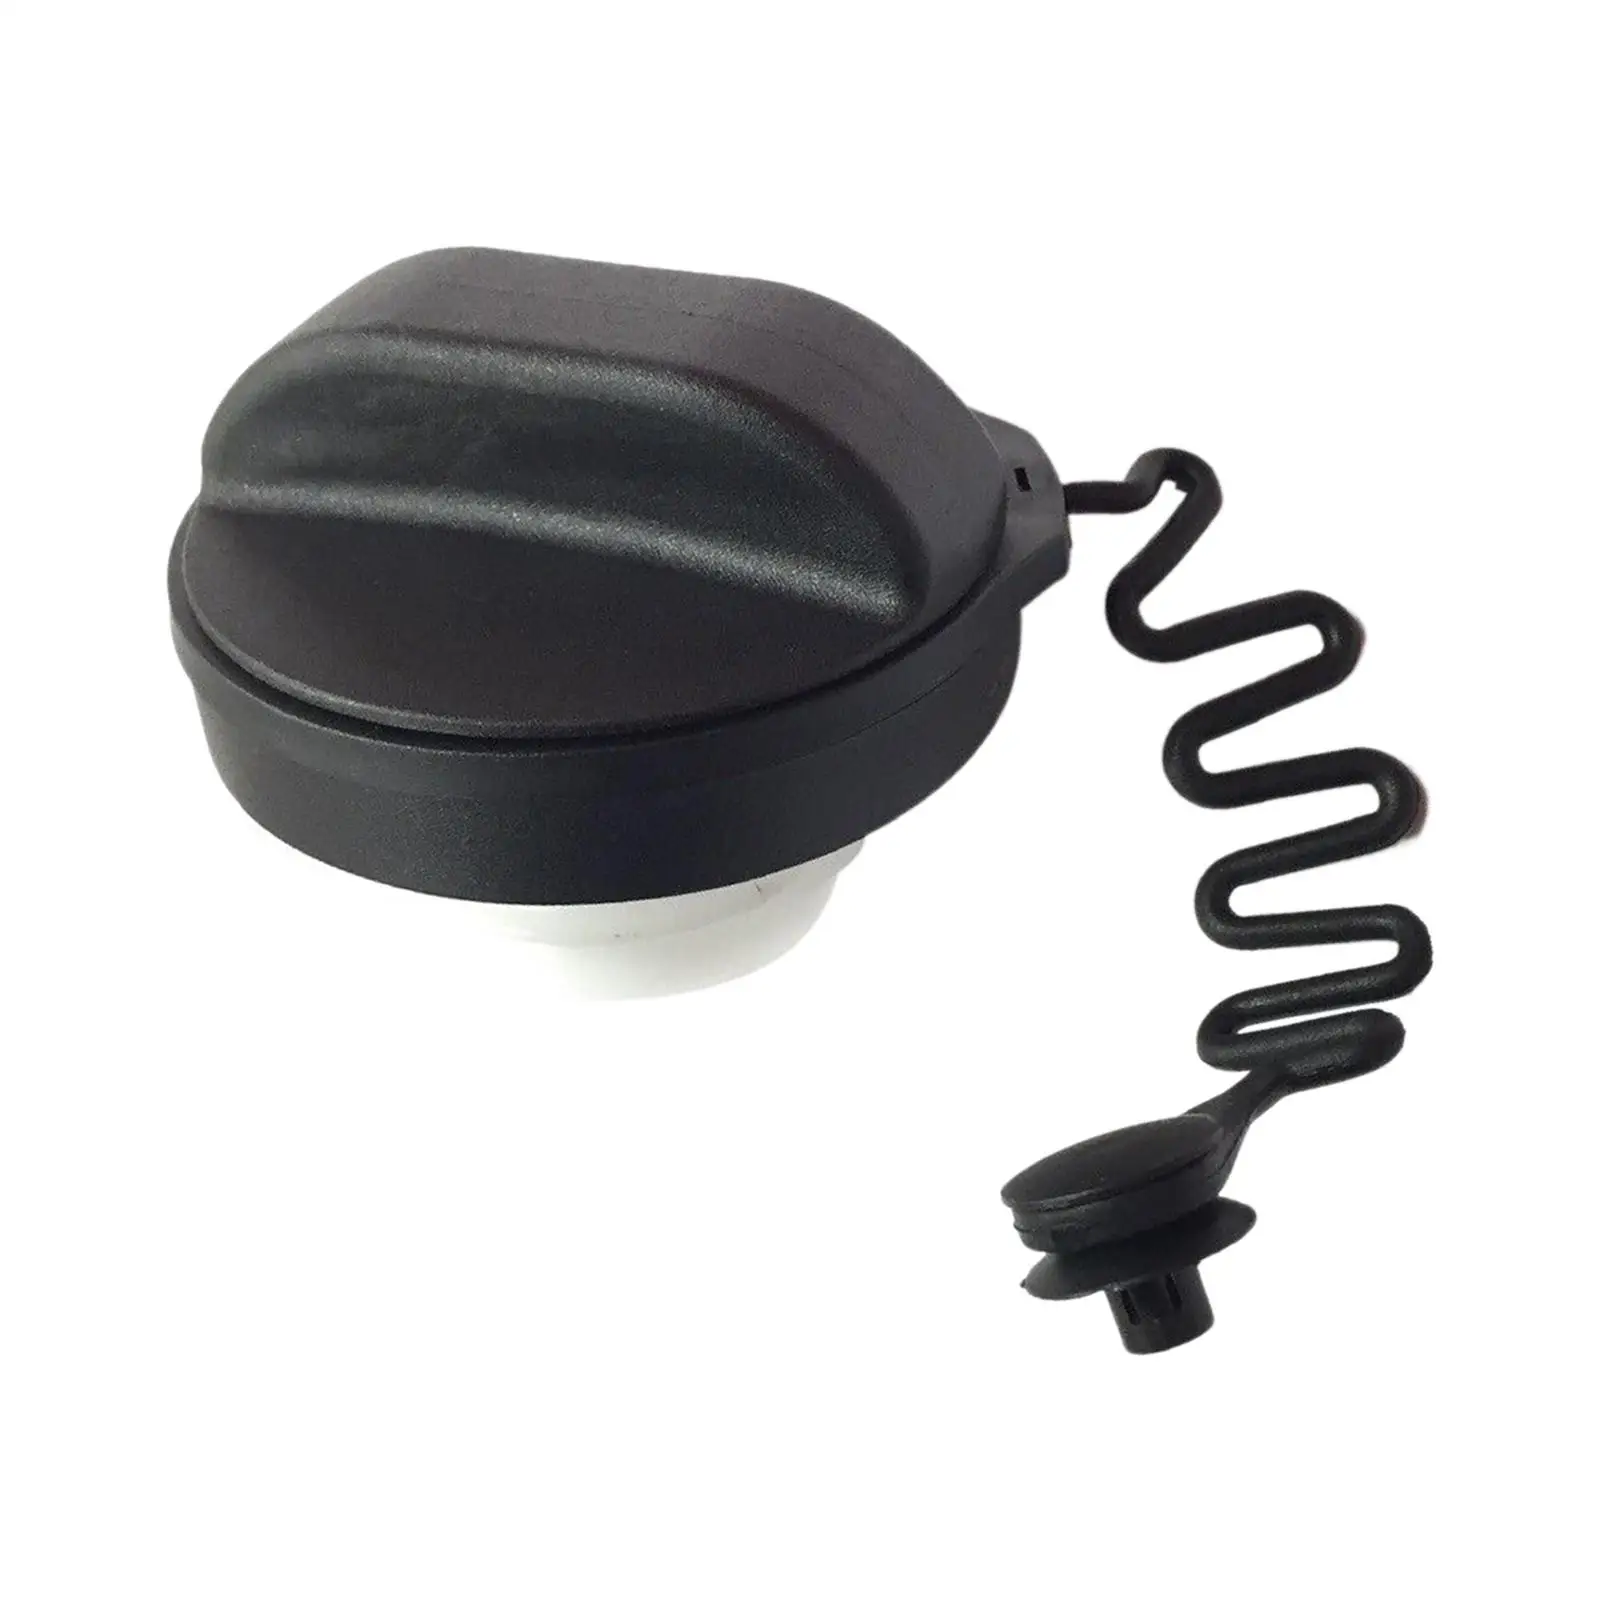 Fuel Filler Cap Assembly Car Accessories for All Nissan Models with Screw in Type Cap Sturdy Easy Installation Repair Part